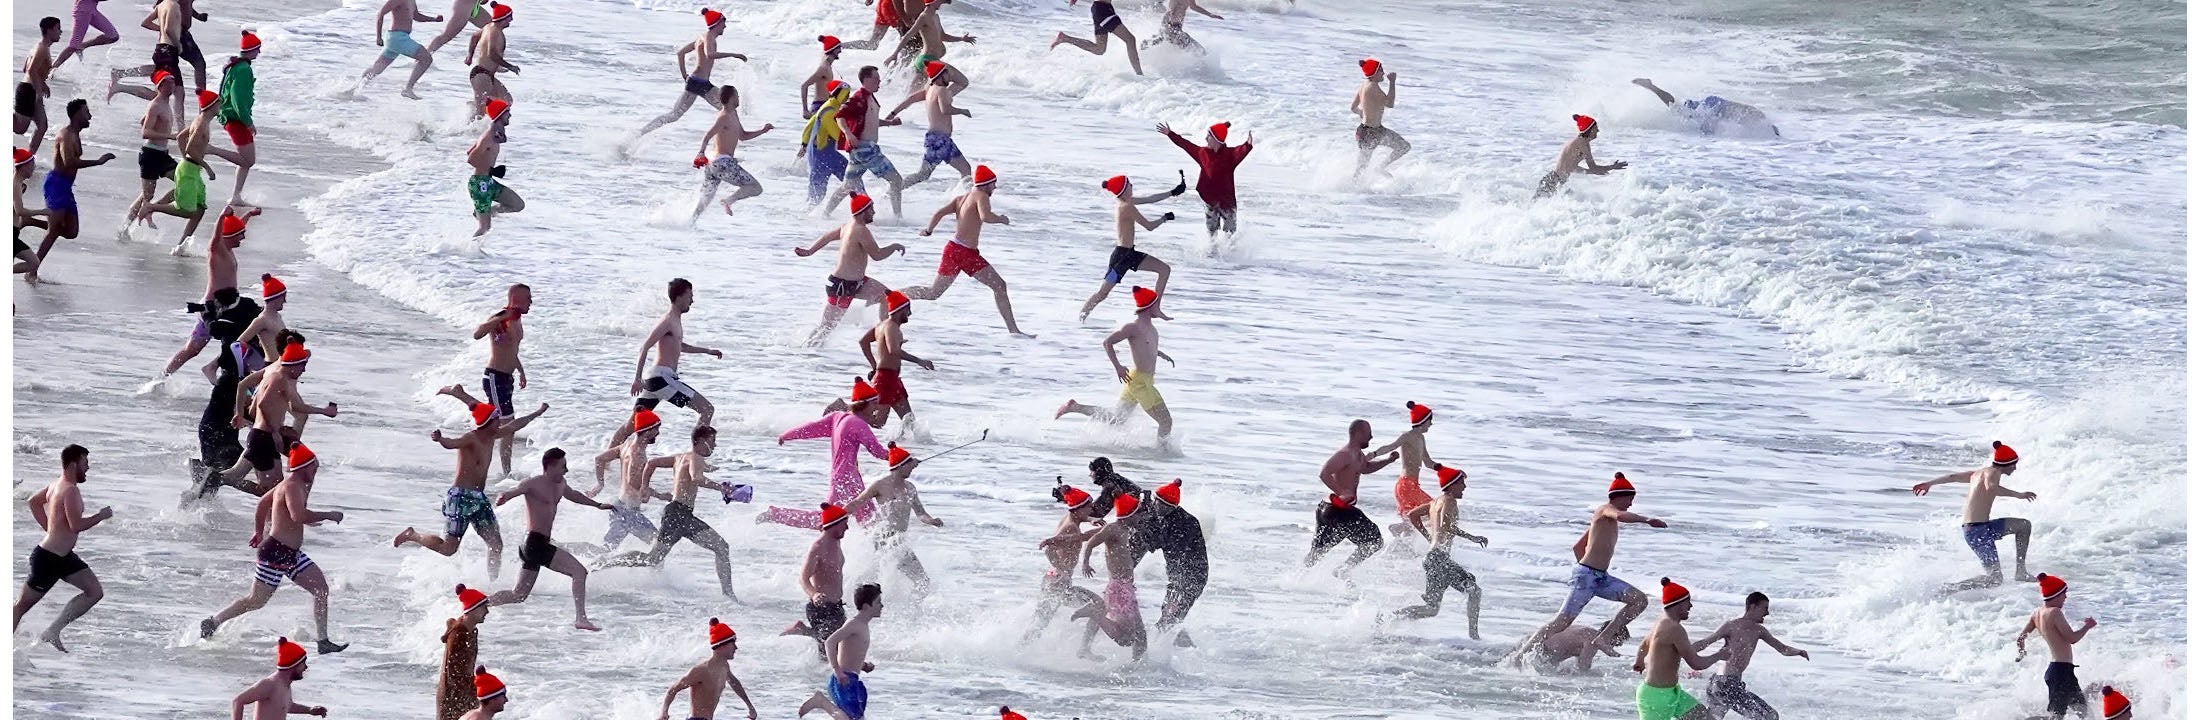 People running into the sea, wearing swimwear and caps